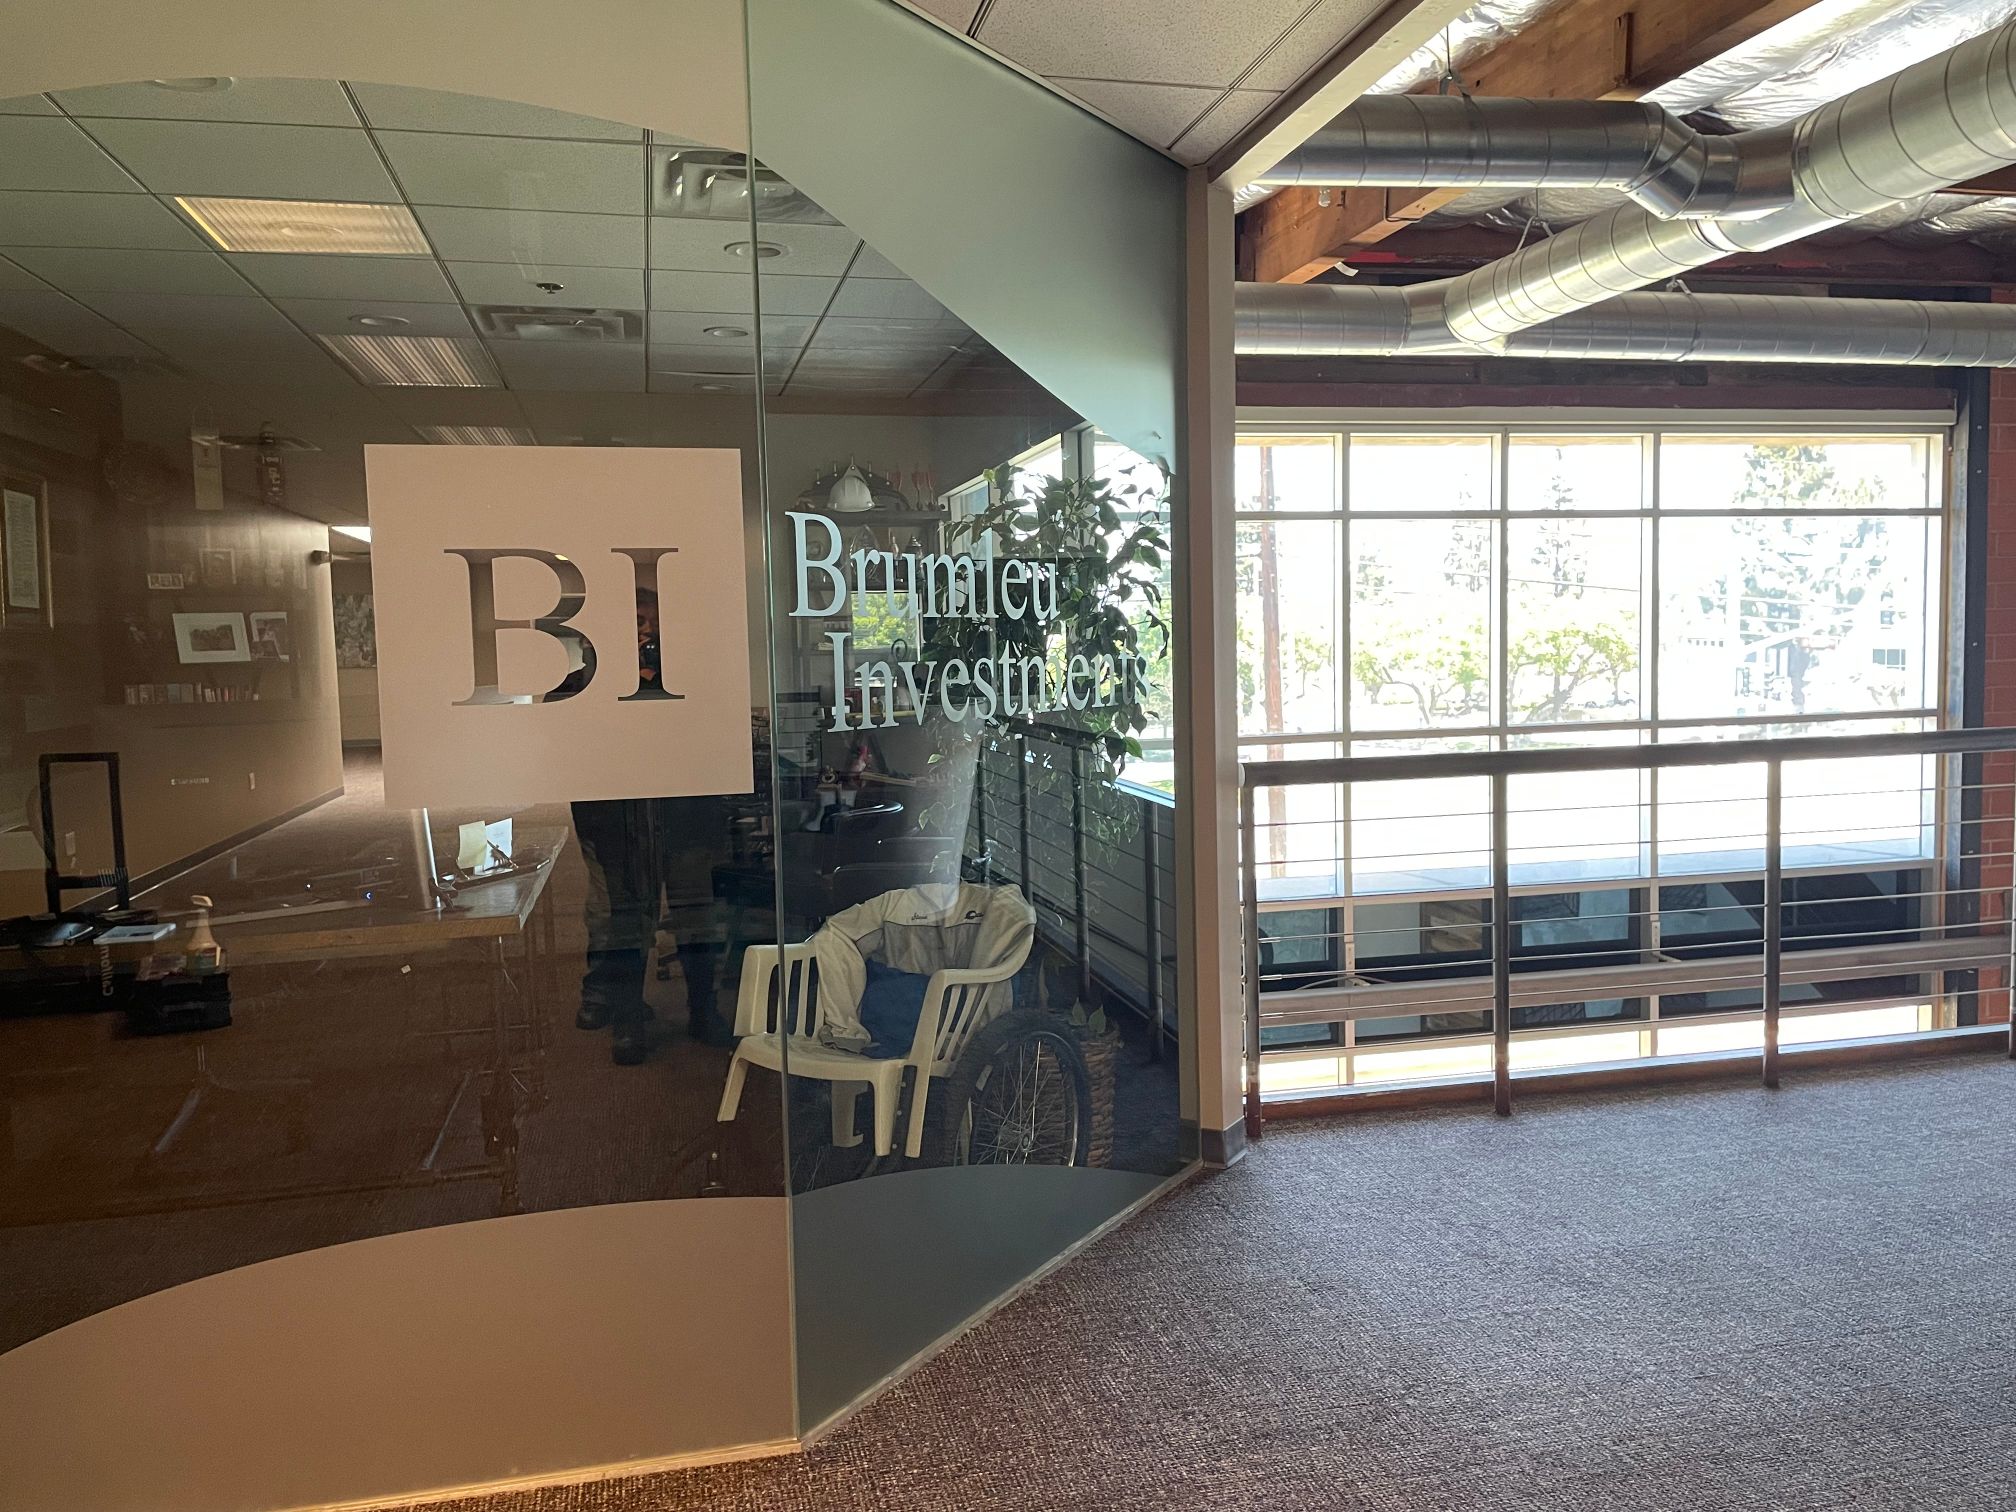 Frosted and Etched Glass Graphics for Offices in Orange County, CA Add Flair and Branding